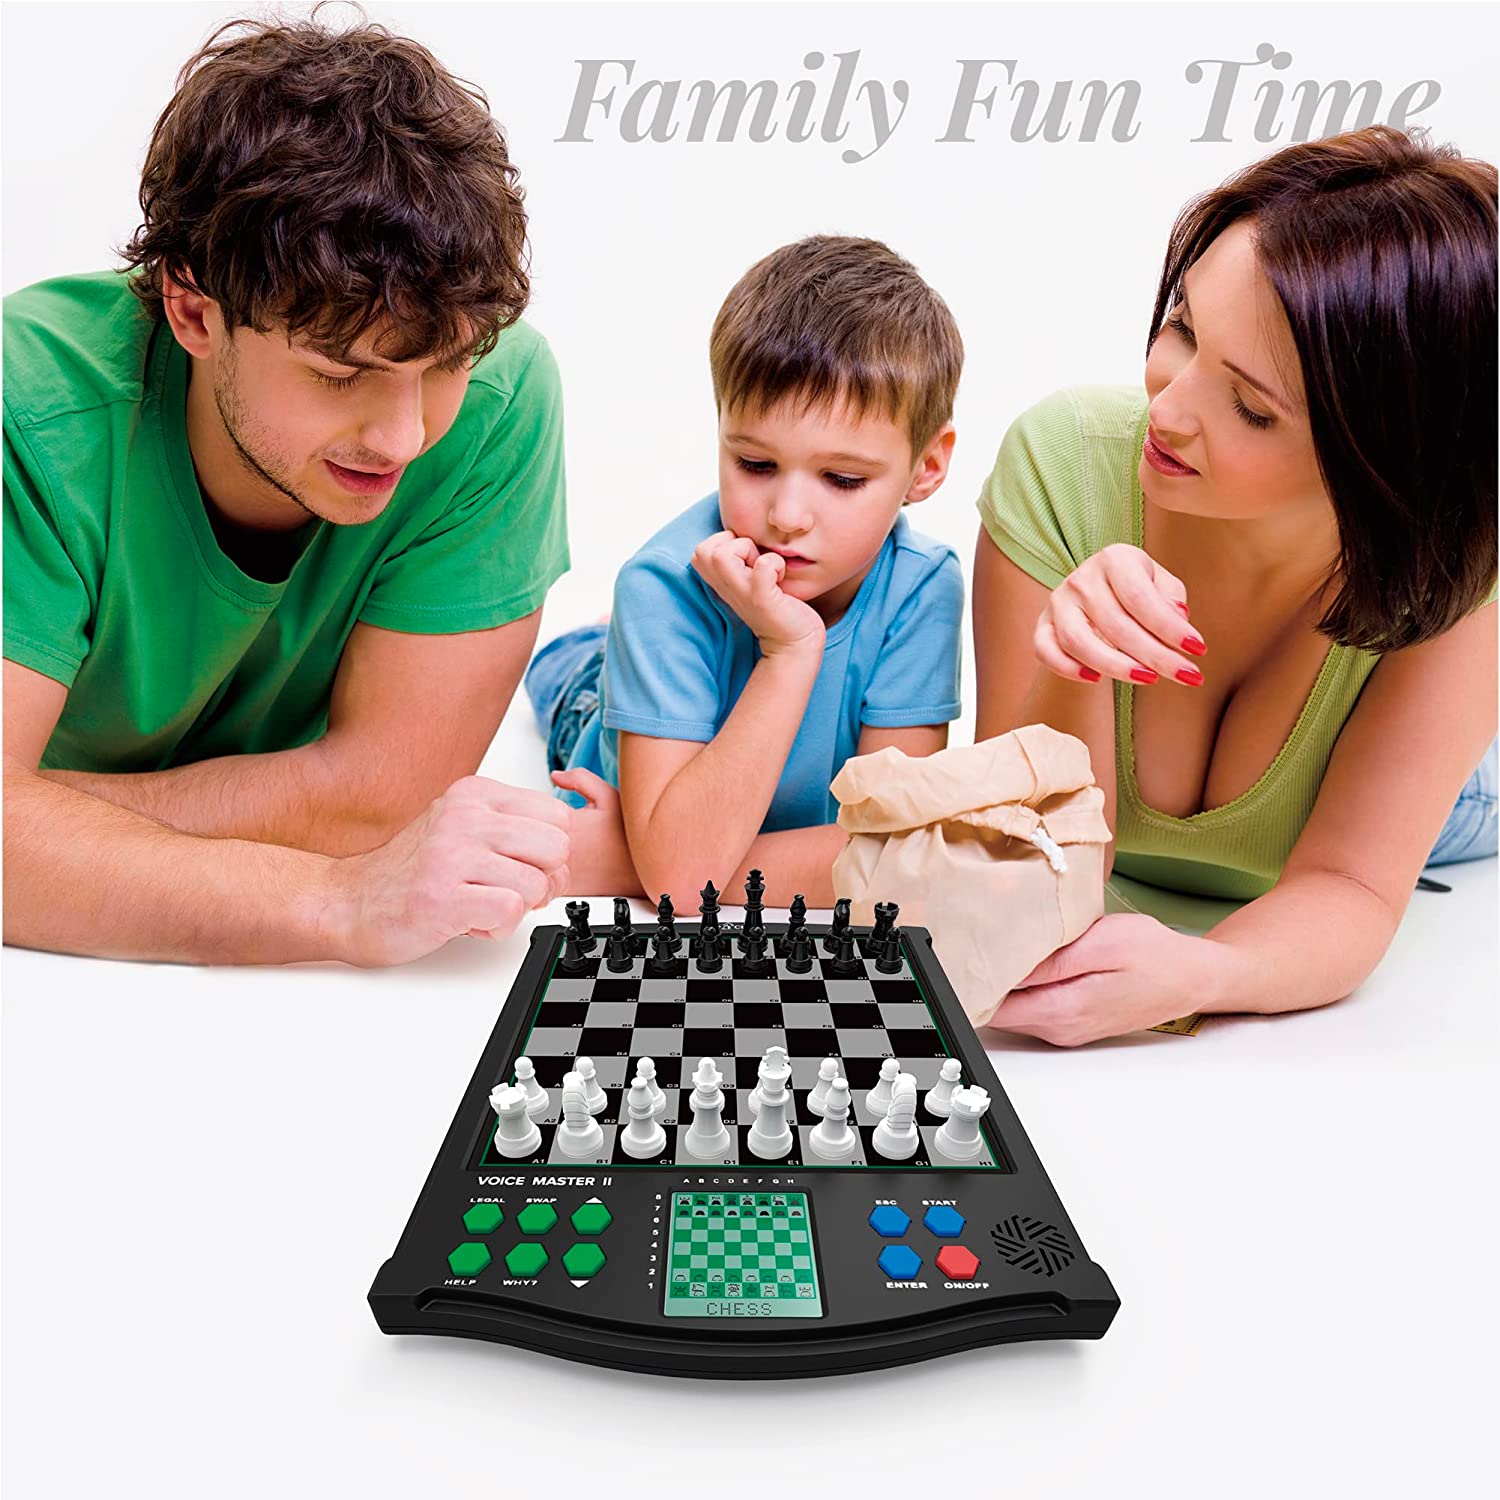 Classic Voice Master Electronic Chess Set - Smart Electronic Chess